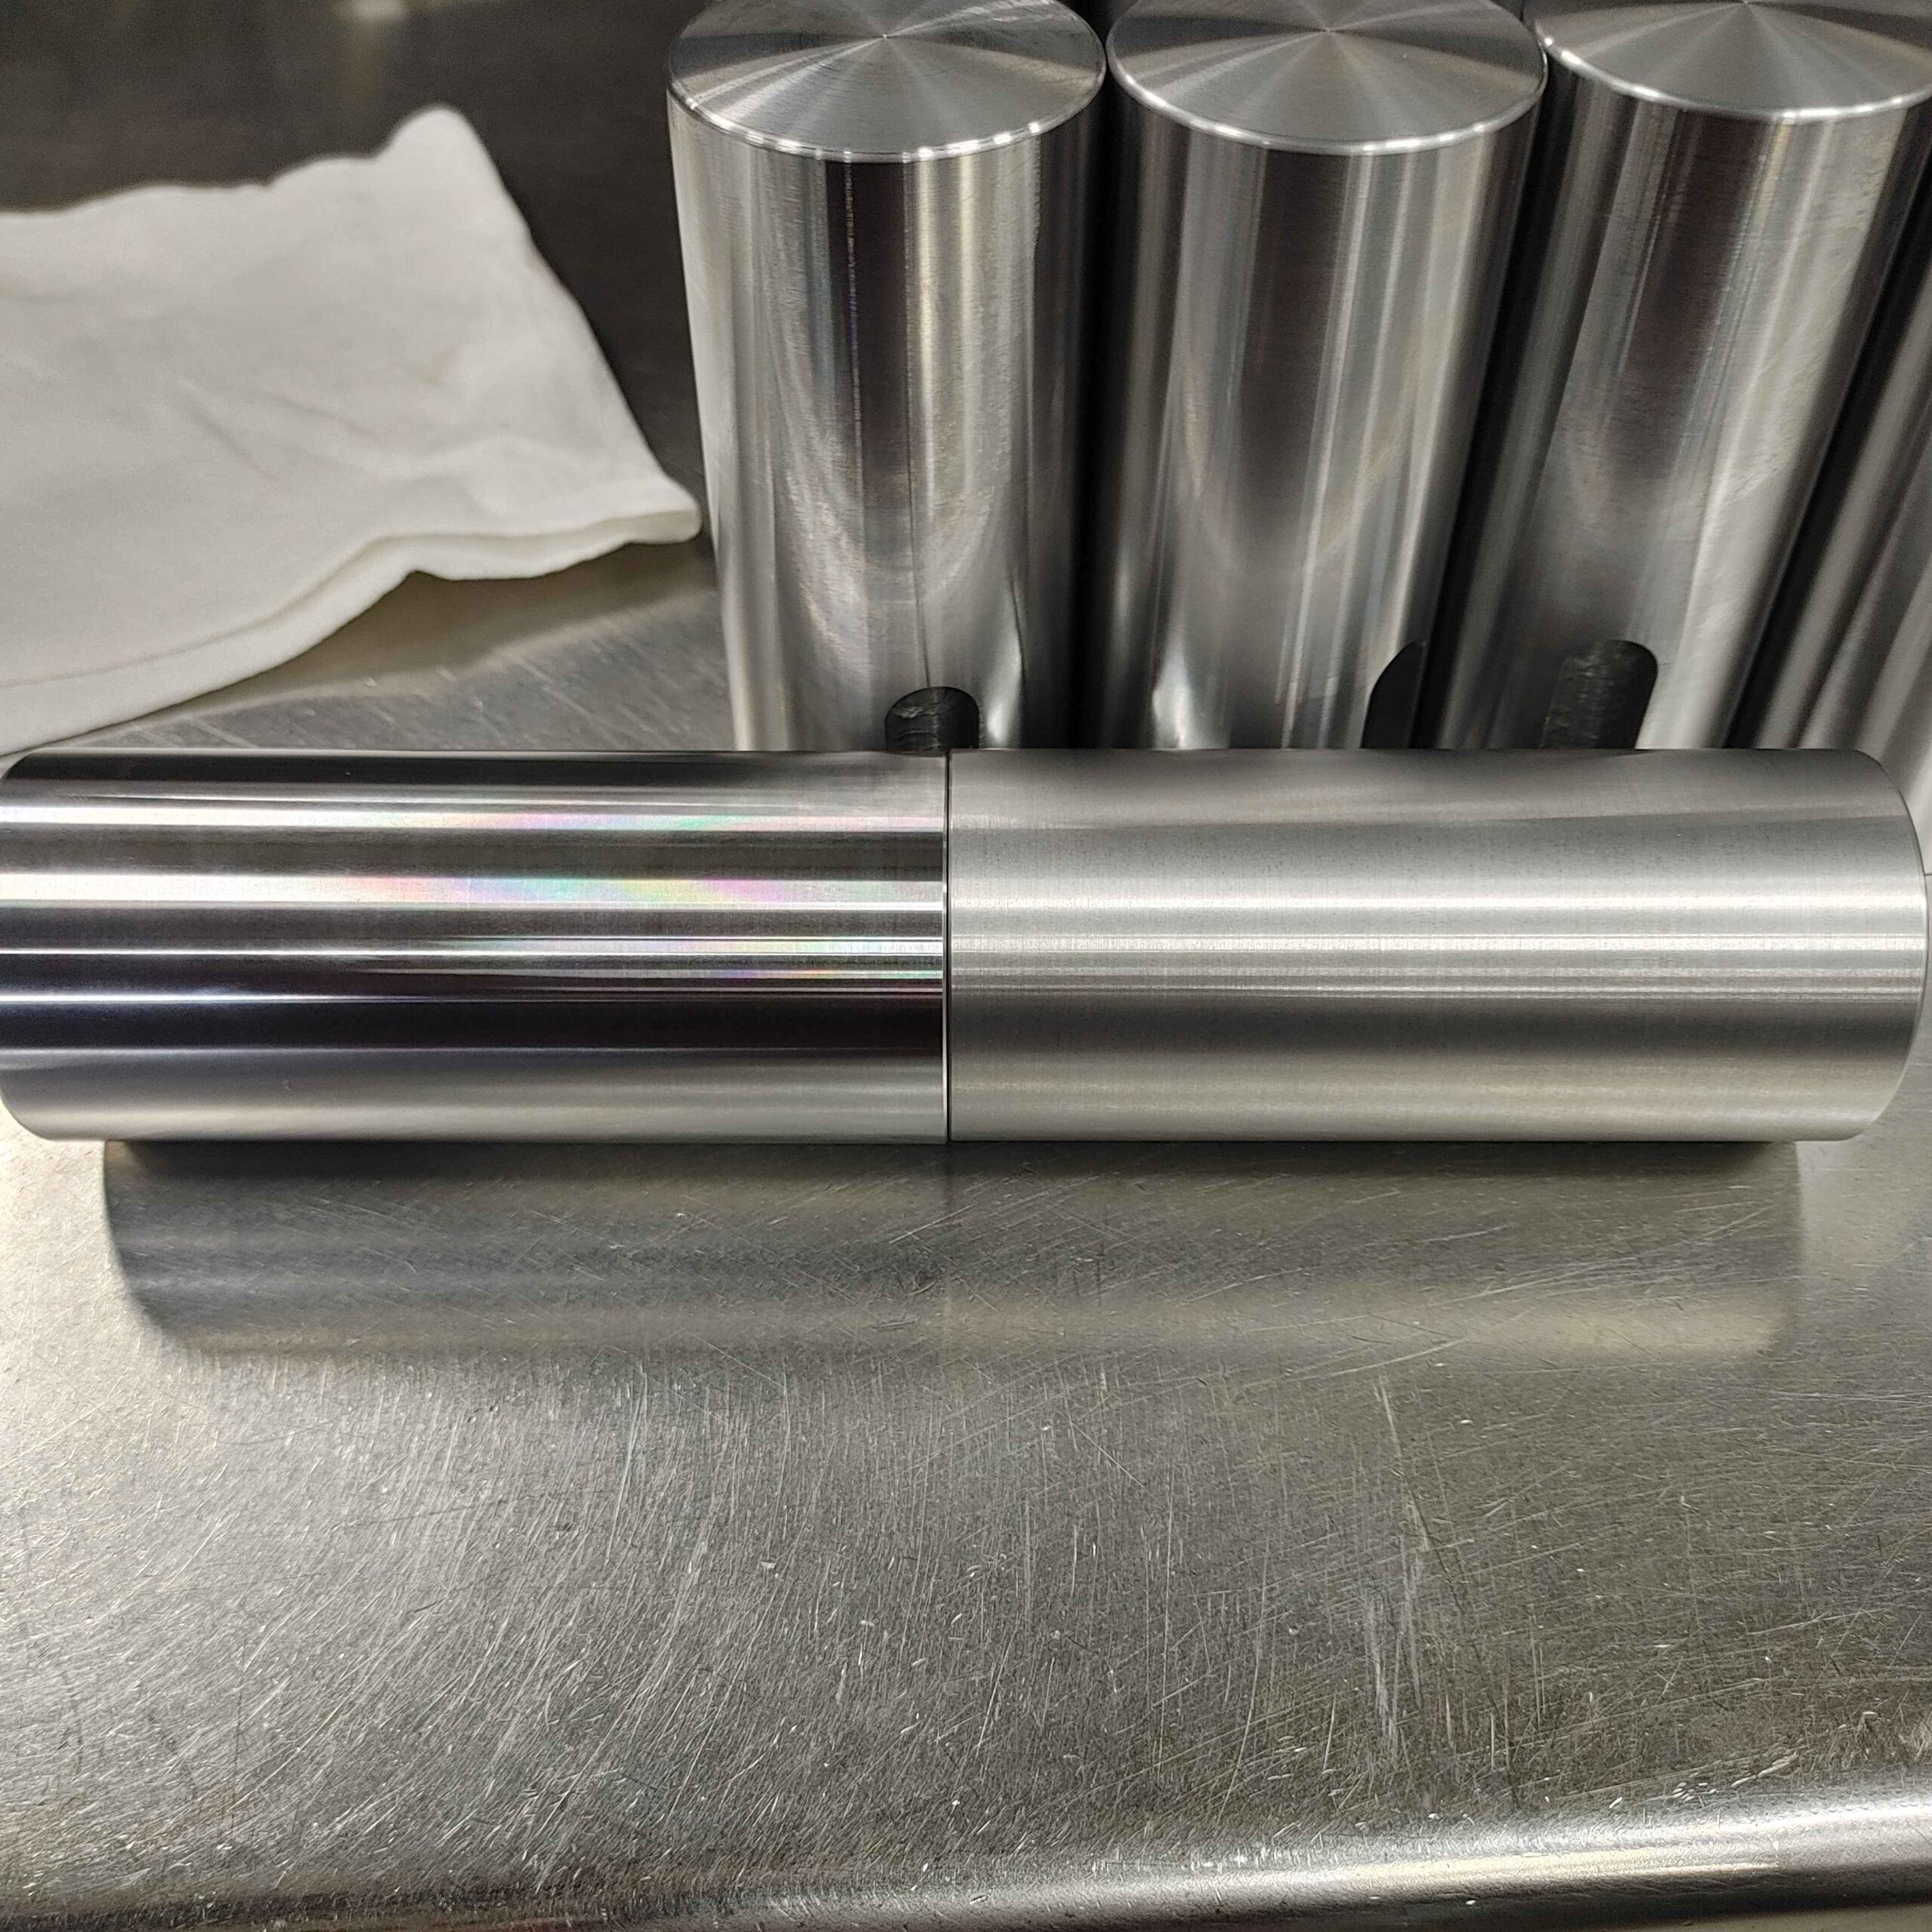 A set of cylindrical metallic objects with a brushed finish, likely precision parts or tools, on a metal surface with a cloth in the background.